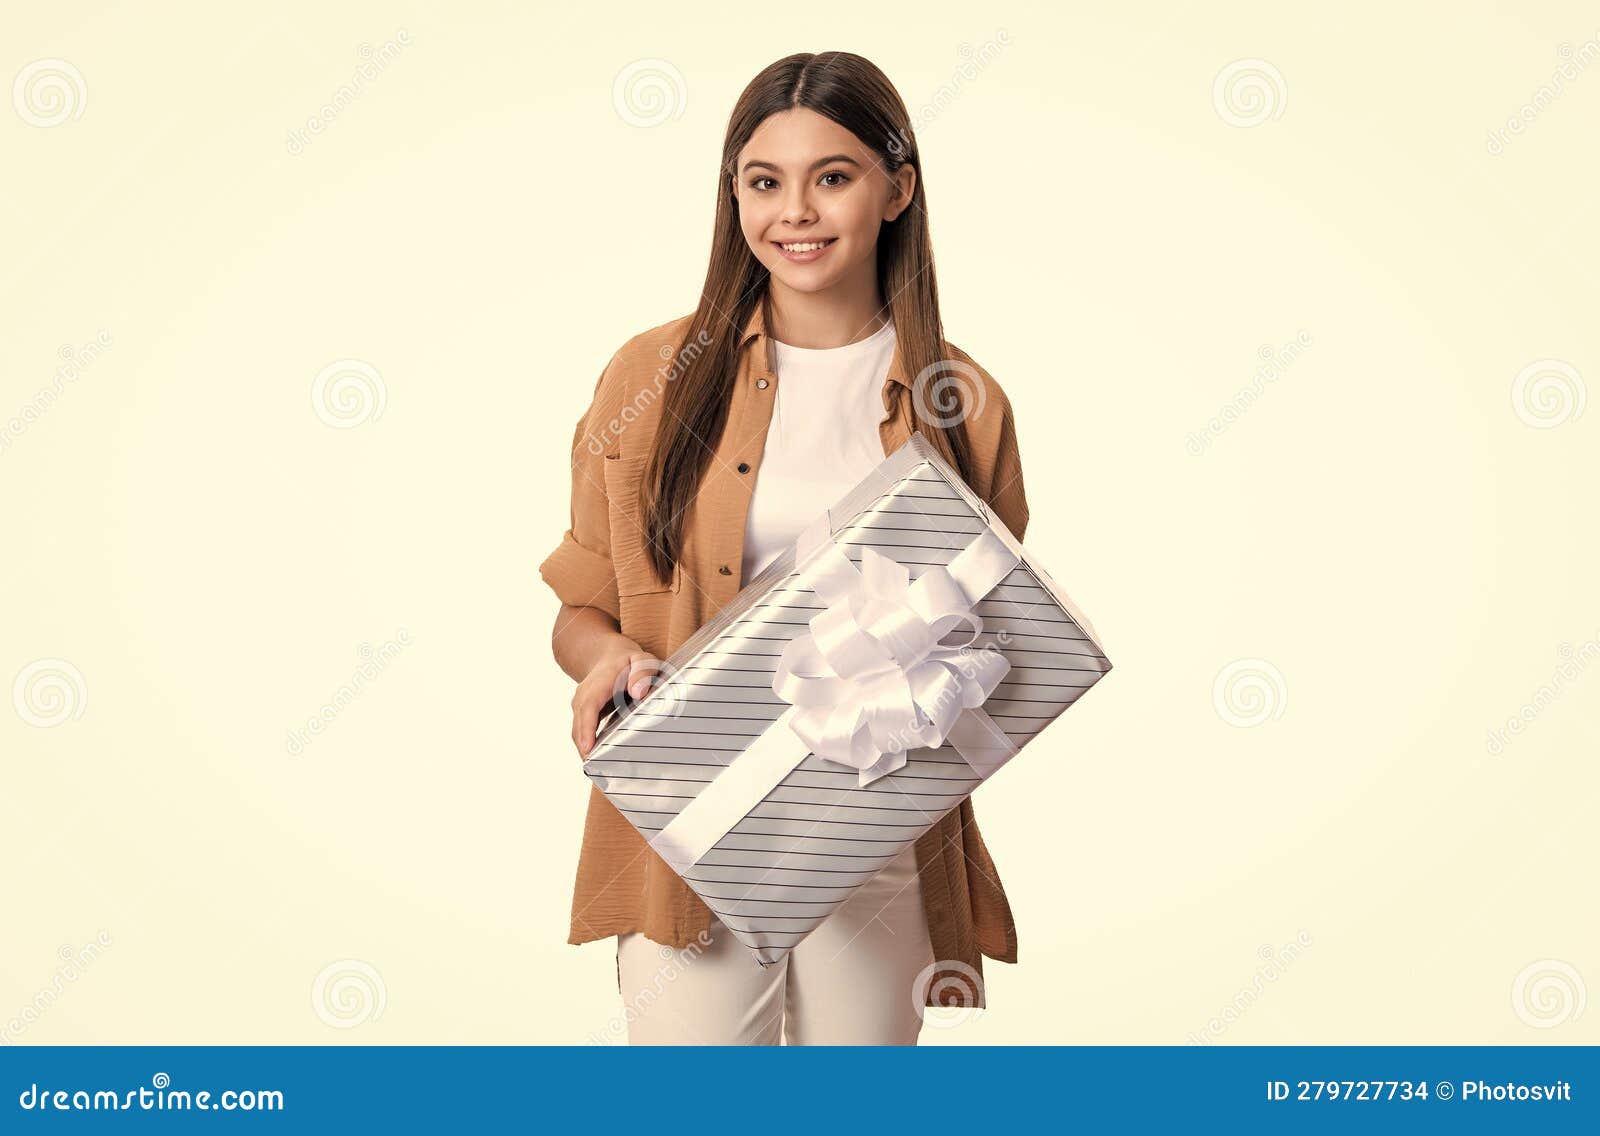 Girl holding a birthday gift, FAQ section